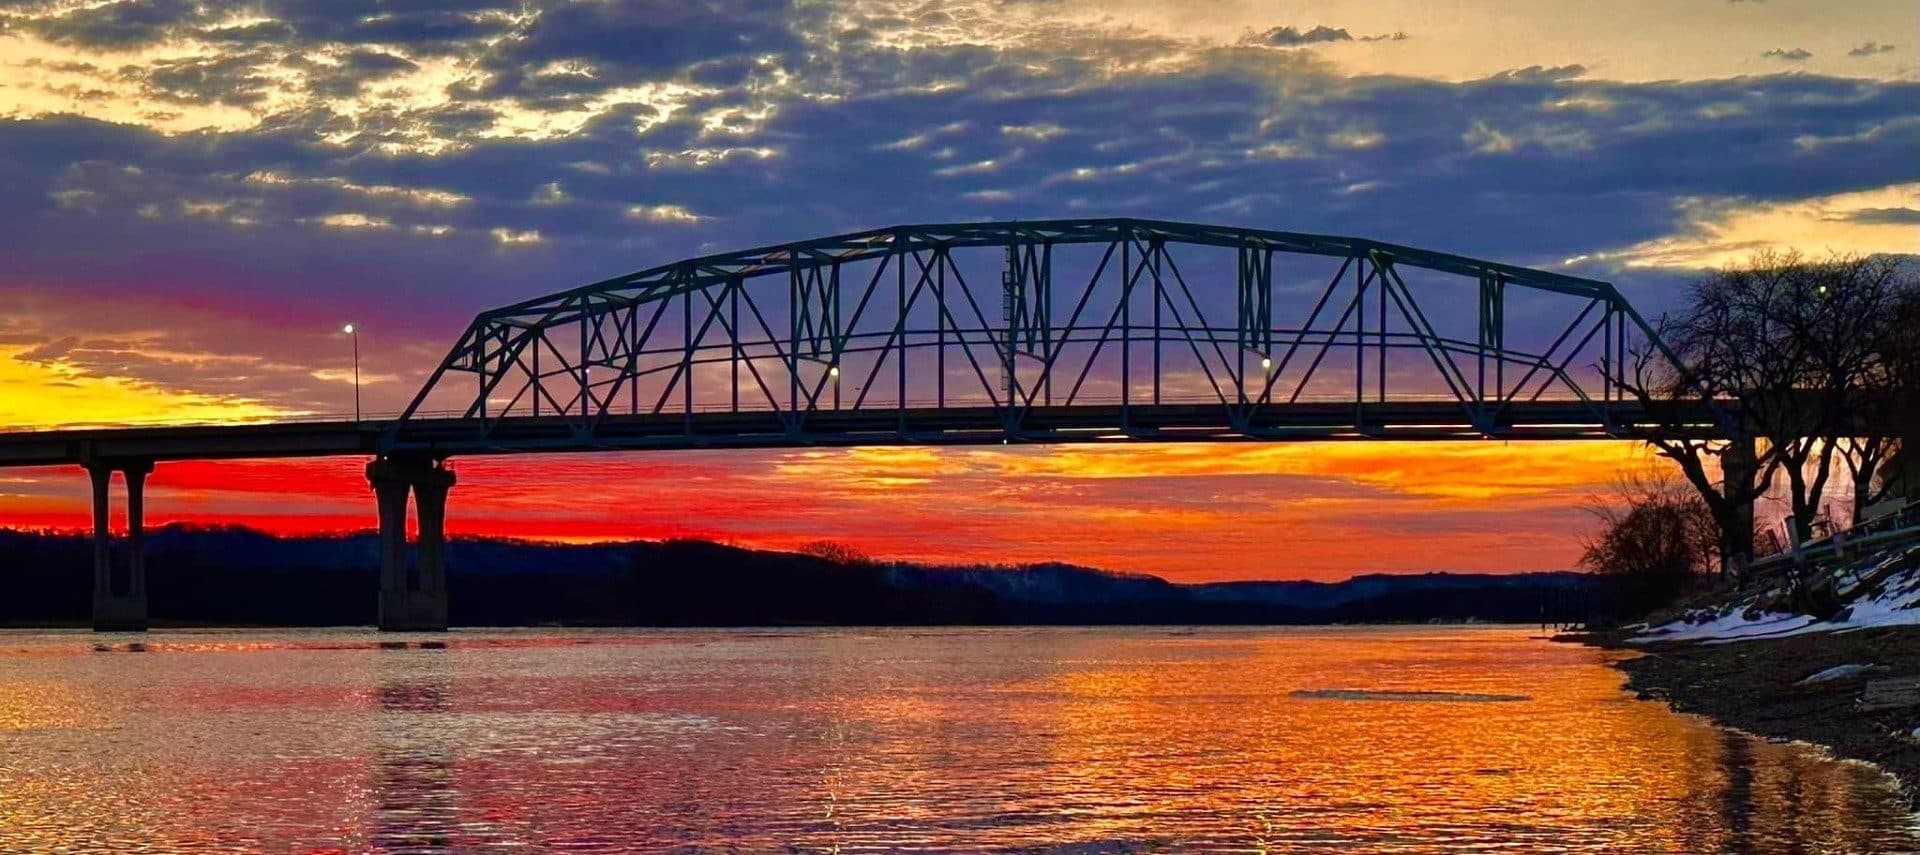 Large bridge over a river of water at sunset with orange and red skies